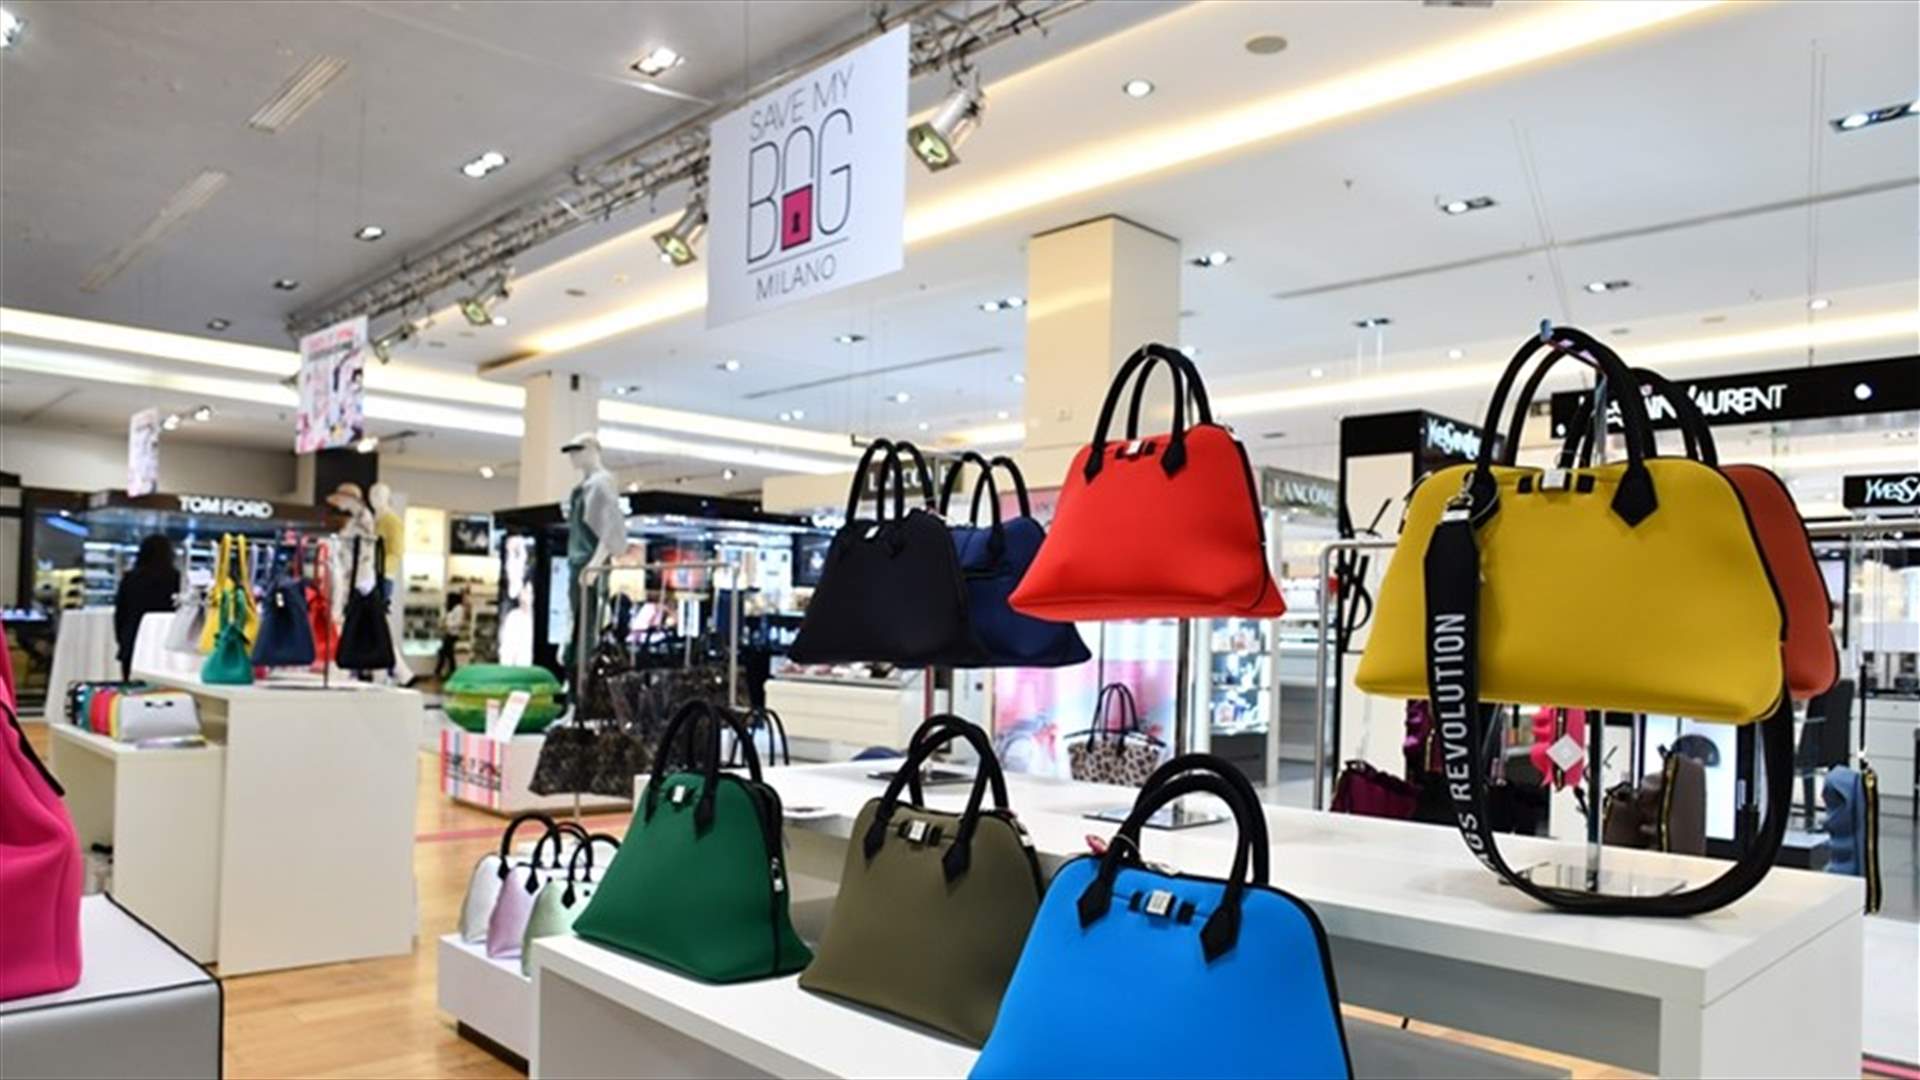 Save My Bag, innovative Italian bags brand set to launch its first pop-up stores in Lebanon at BHV